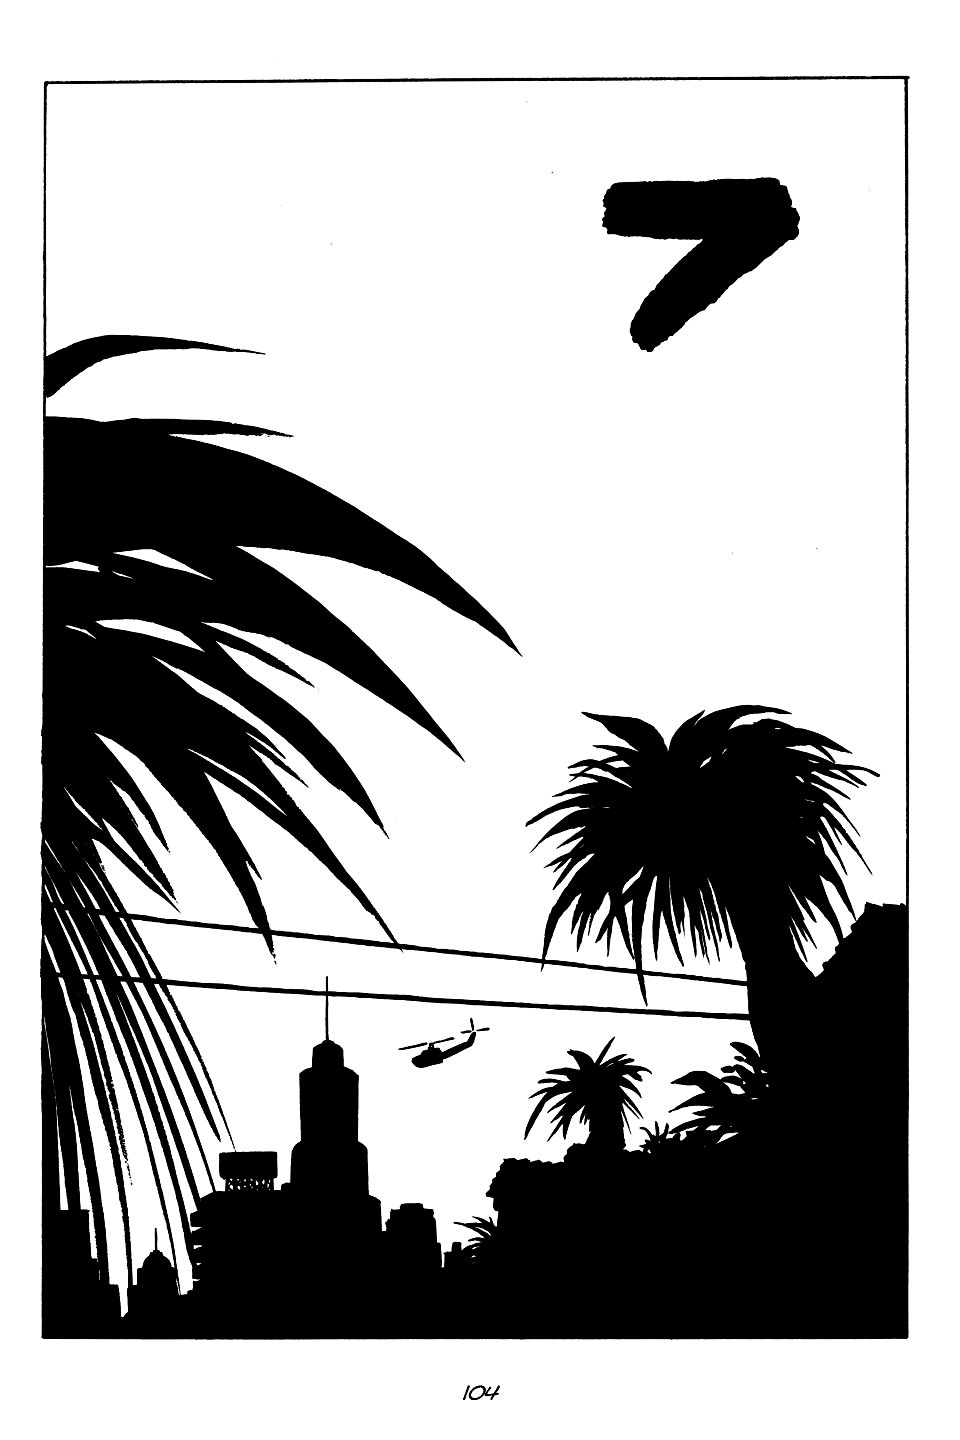 page 104 of sin city 1 the hard goodbye